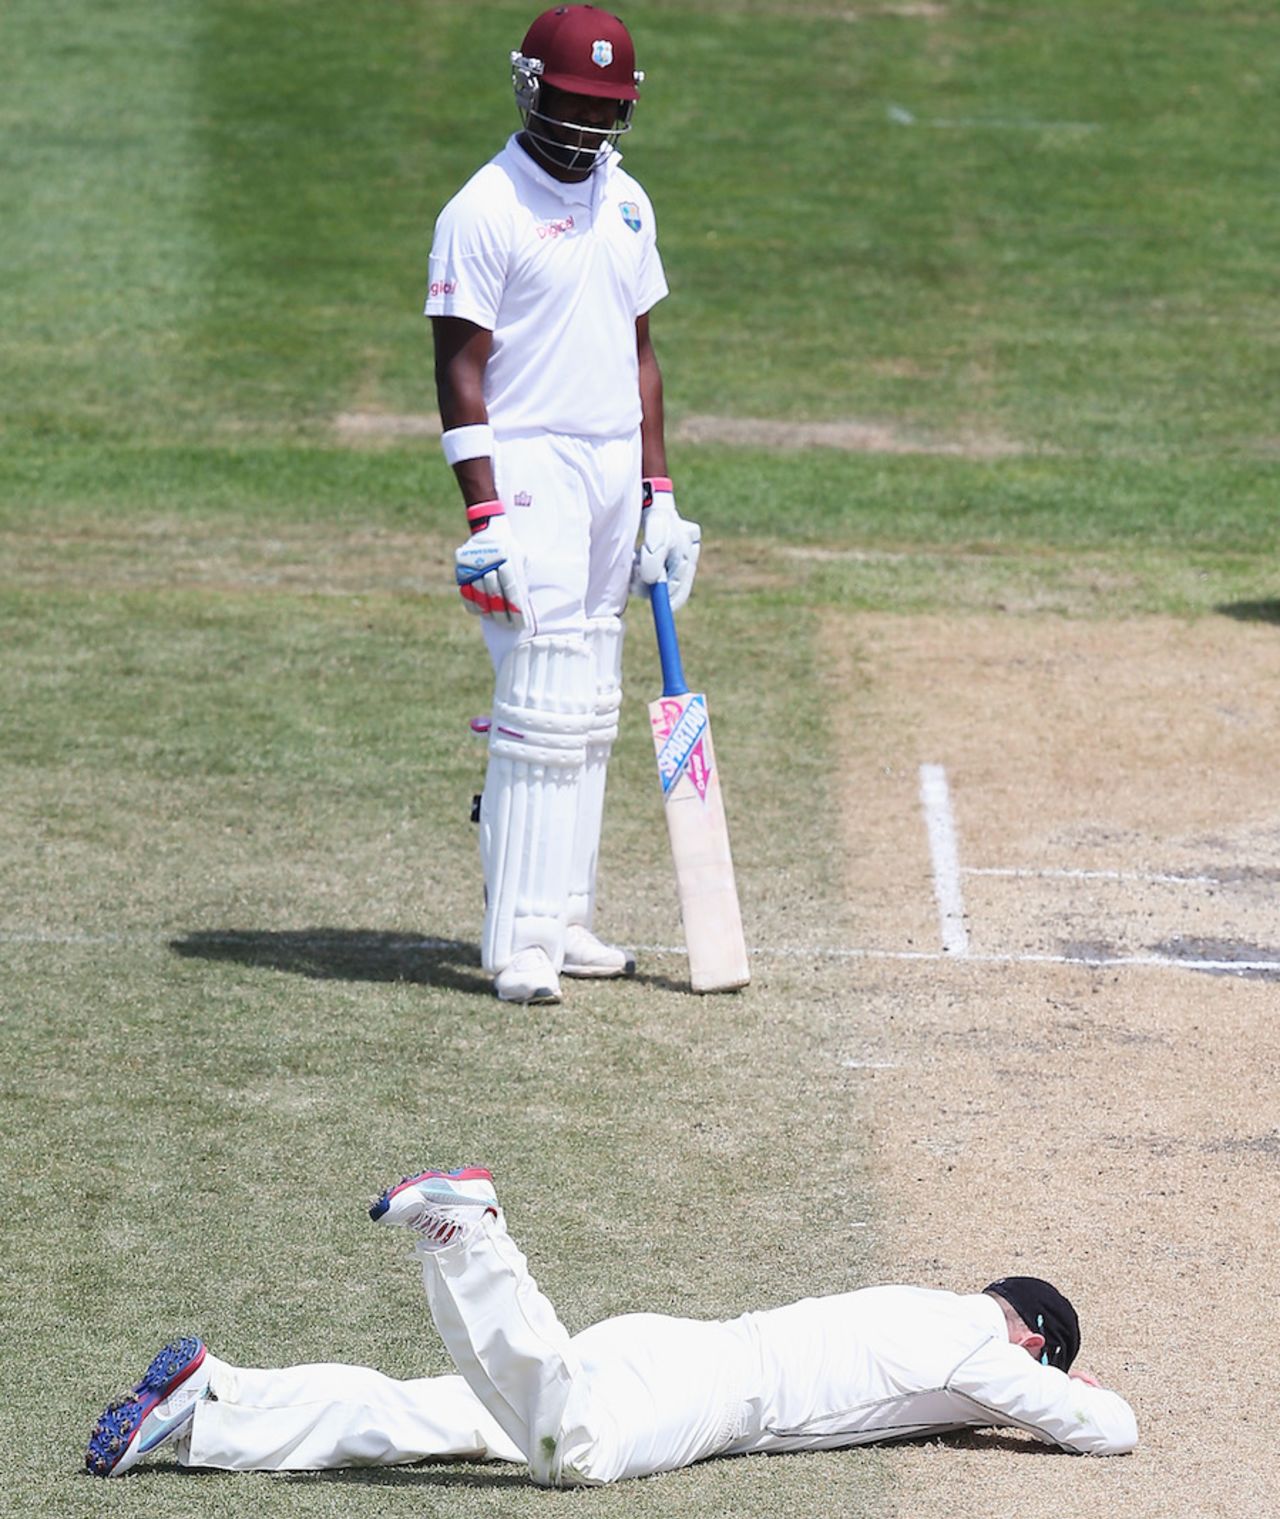 Brendon McCullum reacts after dropping a catch, New Zealand v West Indies, 1st Test, Dunedin, 4th day, December 6, 2013